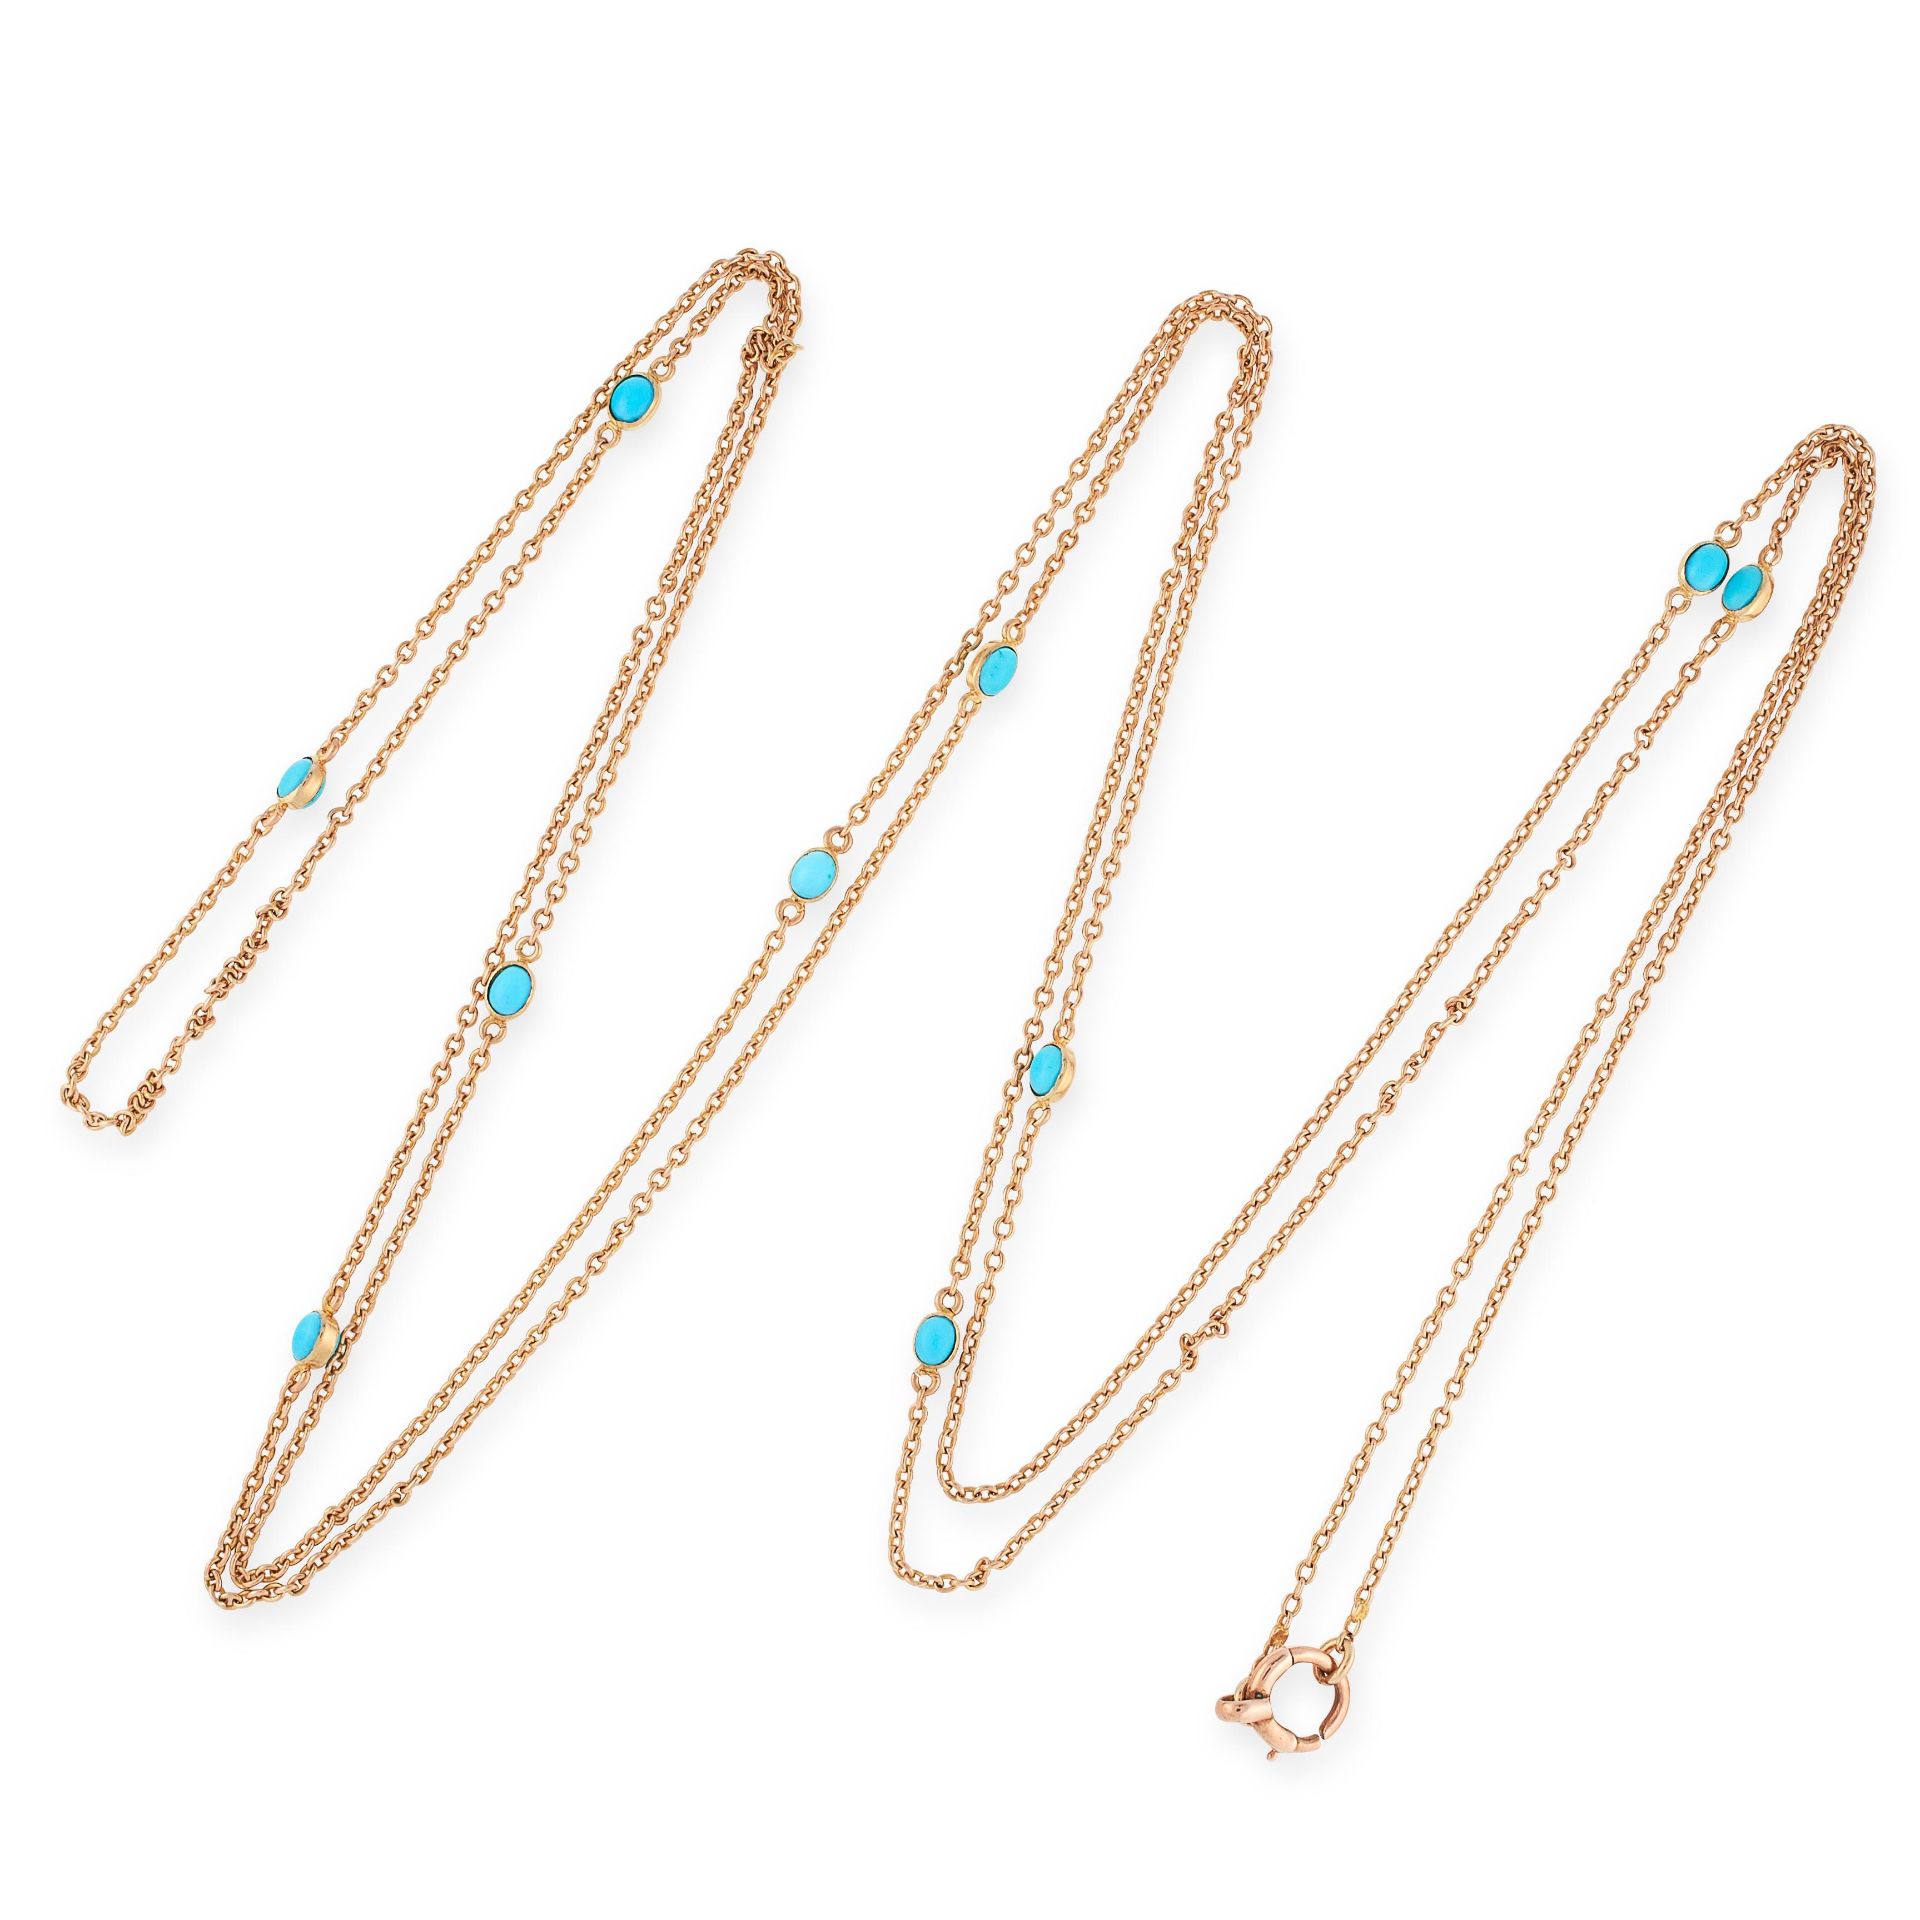 ANTIQUE TURQUOISE SAUTOIR NECKLACE in yellow gold, formed of lengths of belcher link chain